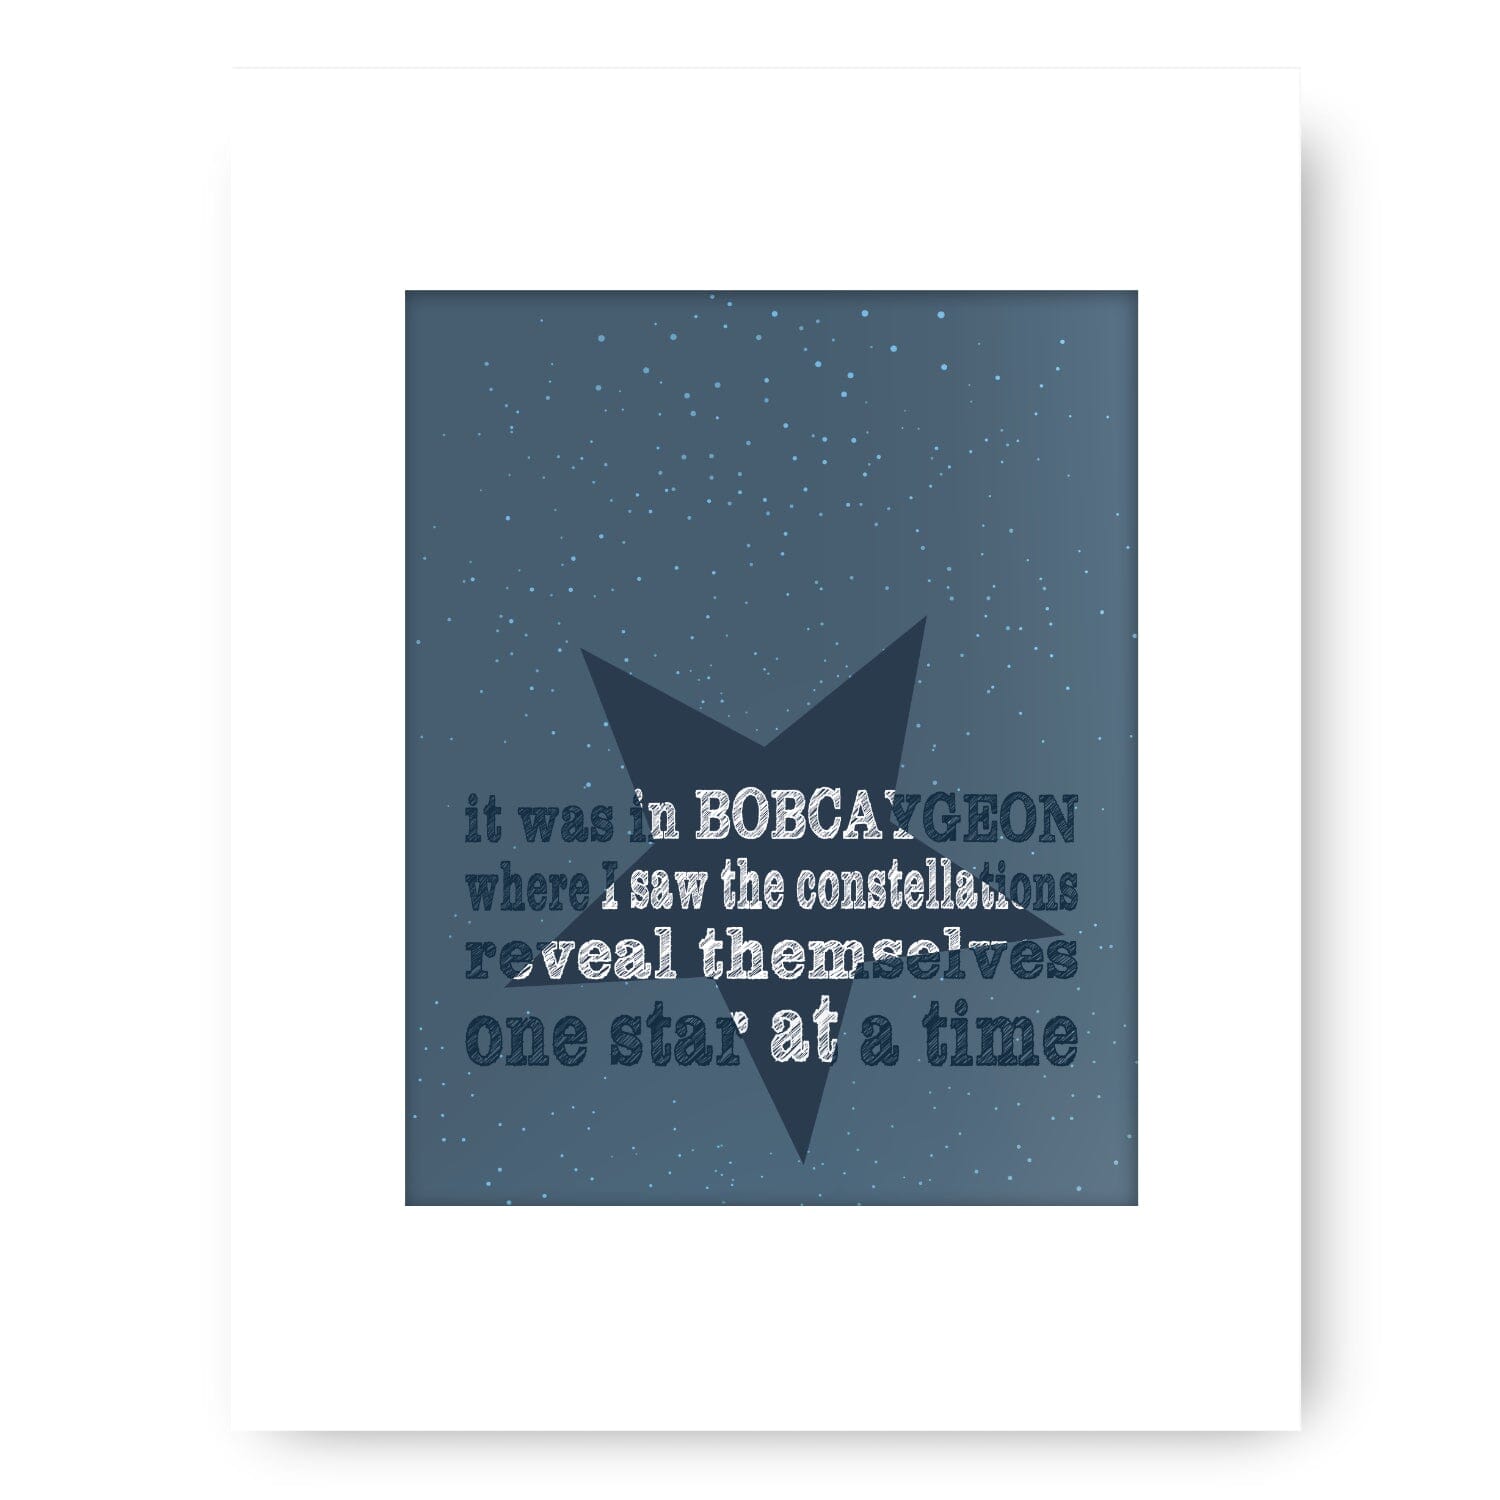 Bobcaygeon by Tragically Hip - Music Poster Song Lyric Art Song Lyrics Art Song Lyrics Art 8x10 White Matted Print 